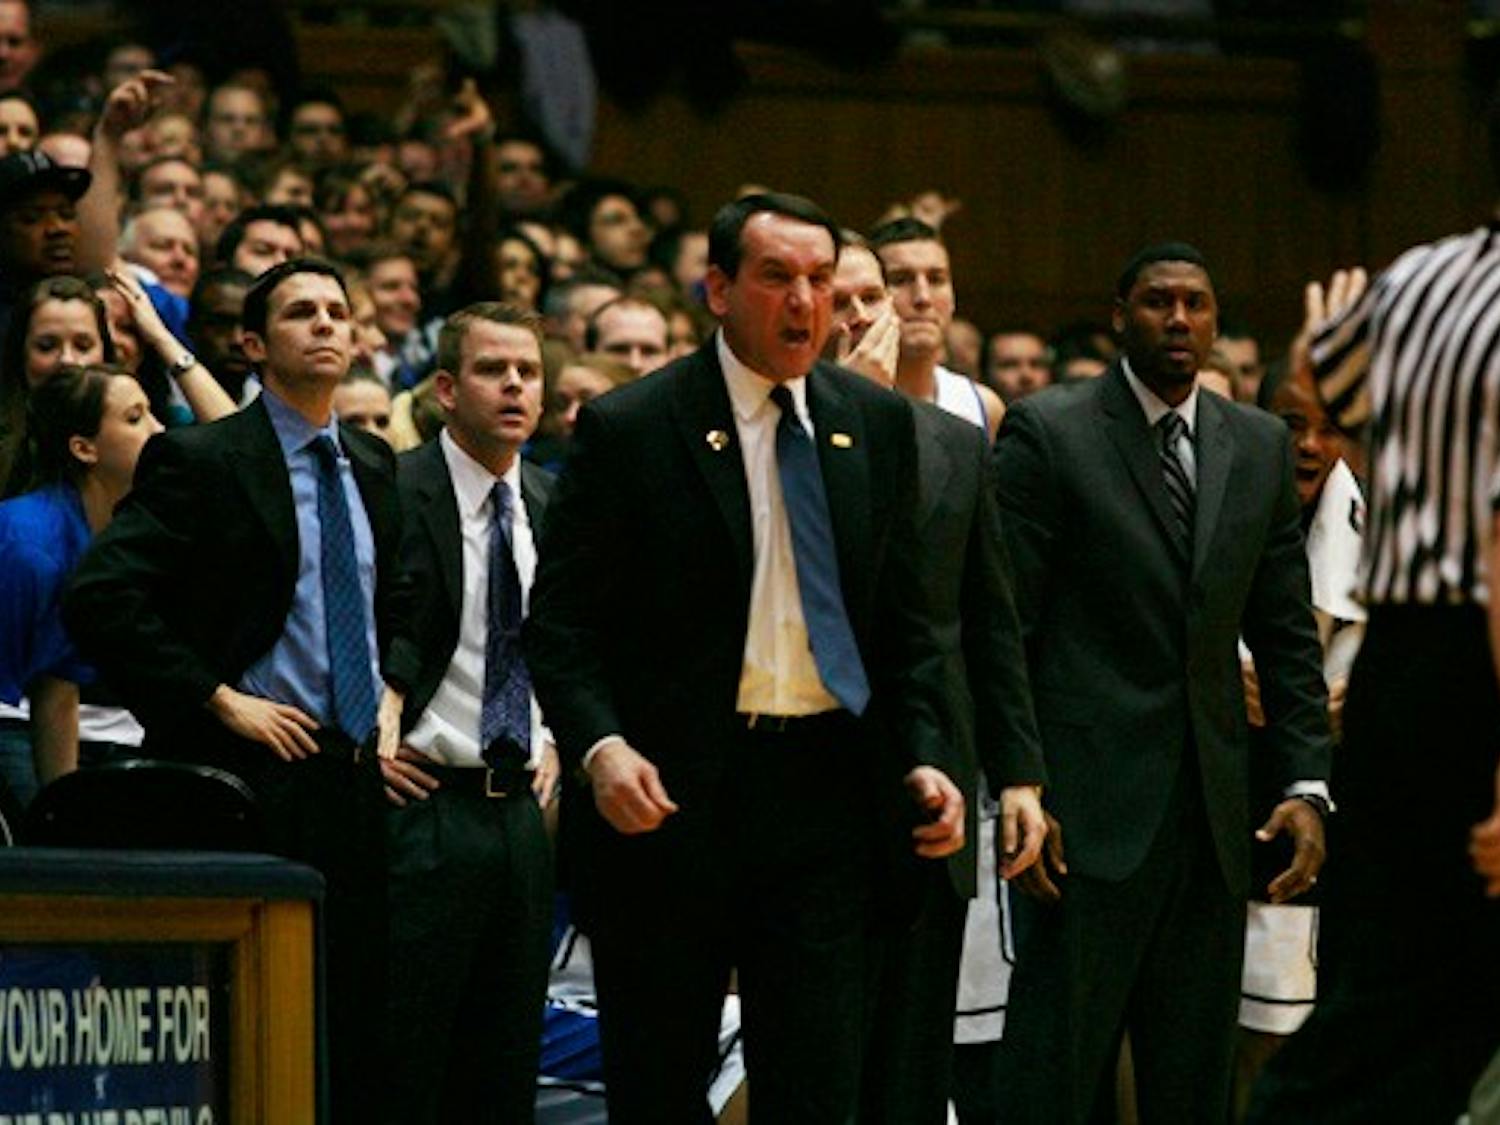 After head coach Mike Krzyzewski was called for his first technical foul of the year, Duke outscored Georgia Tech 24-10 in the remainder of the first half.